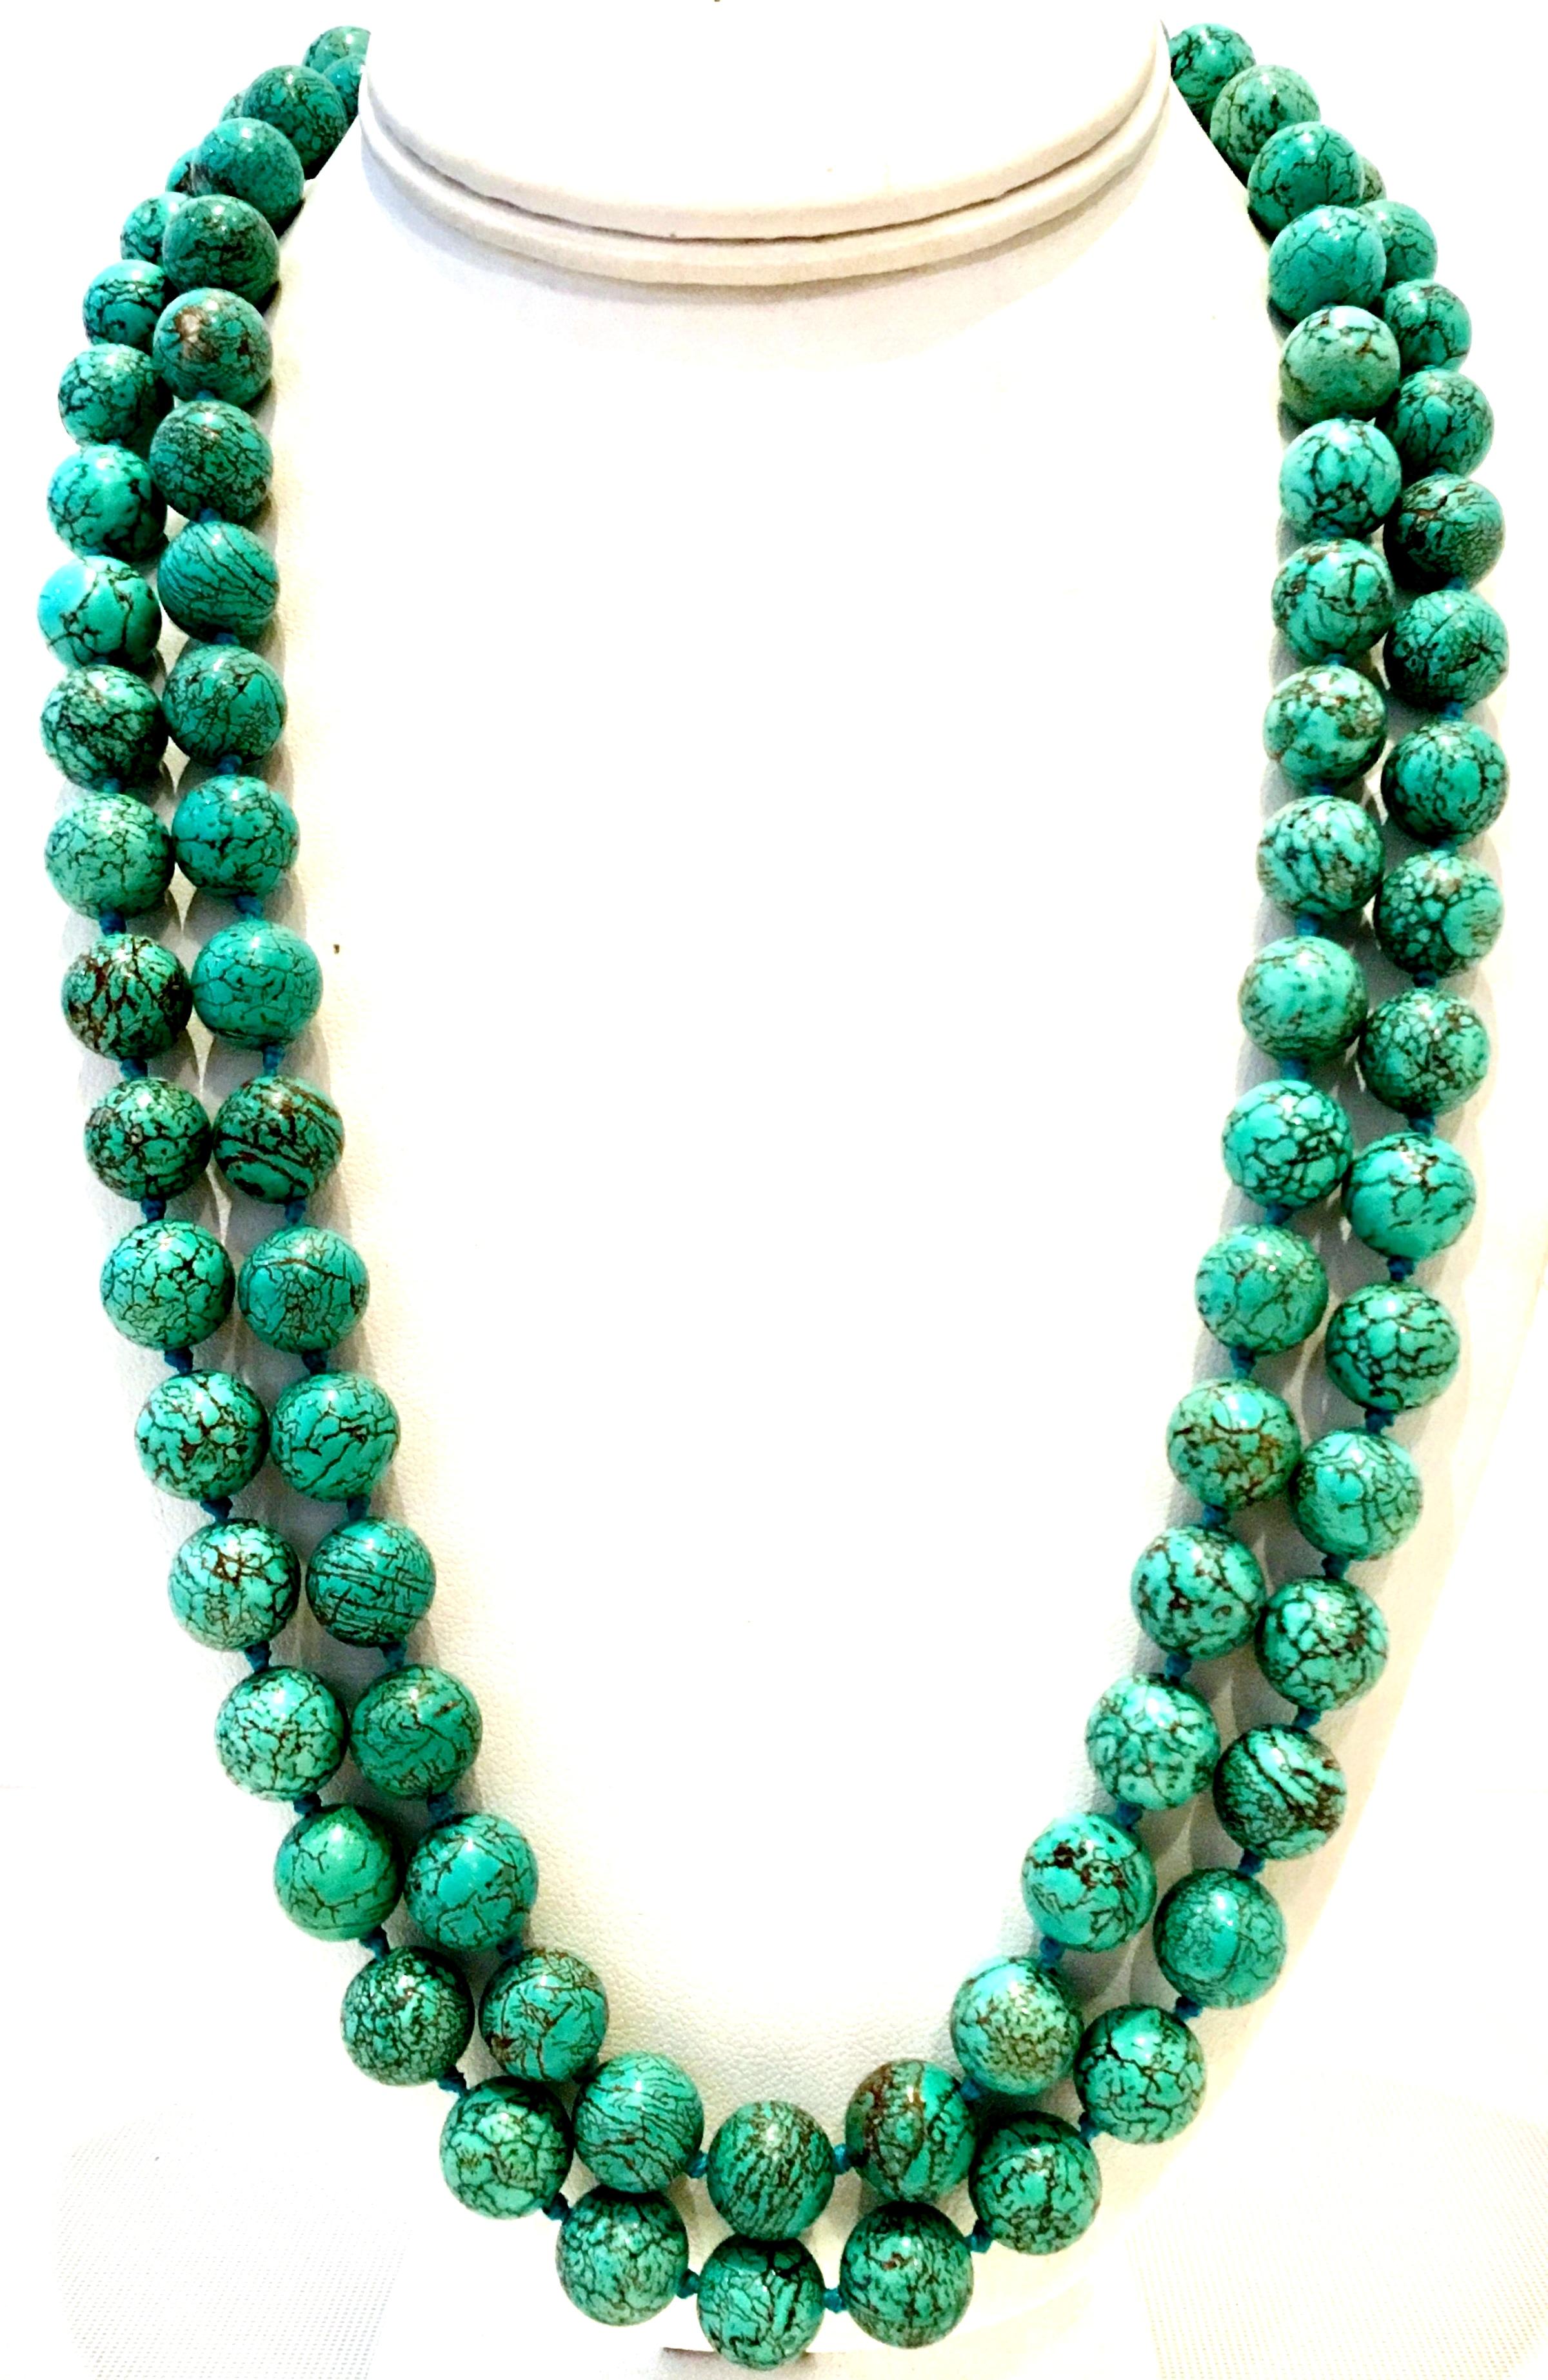 20th Century Authentic Natural Polished Turquoise Bead Opera Length Necklace. This rare and pristine piece features polished turquoise beads with lovely natural brown veining. Each bead is approximately .50